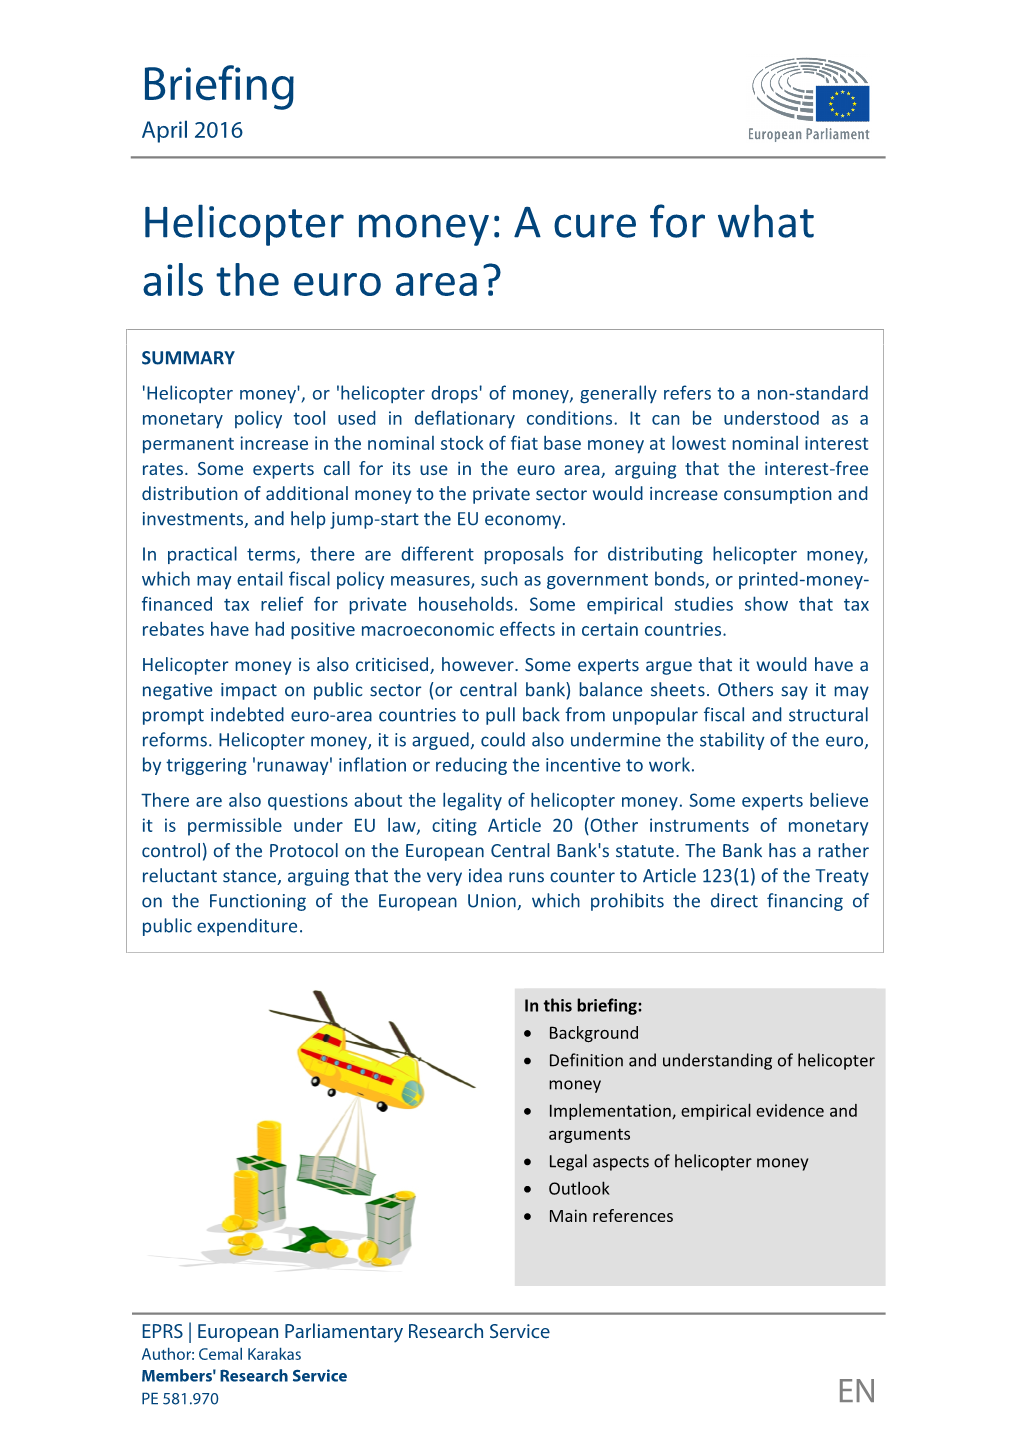 Helicopter Money: a Cure for What Ails the Euro Area?